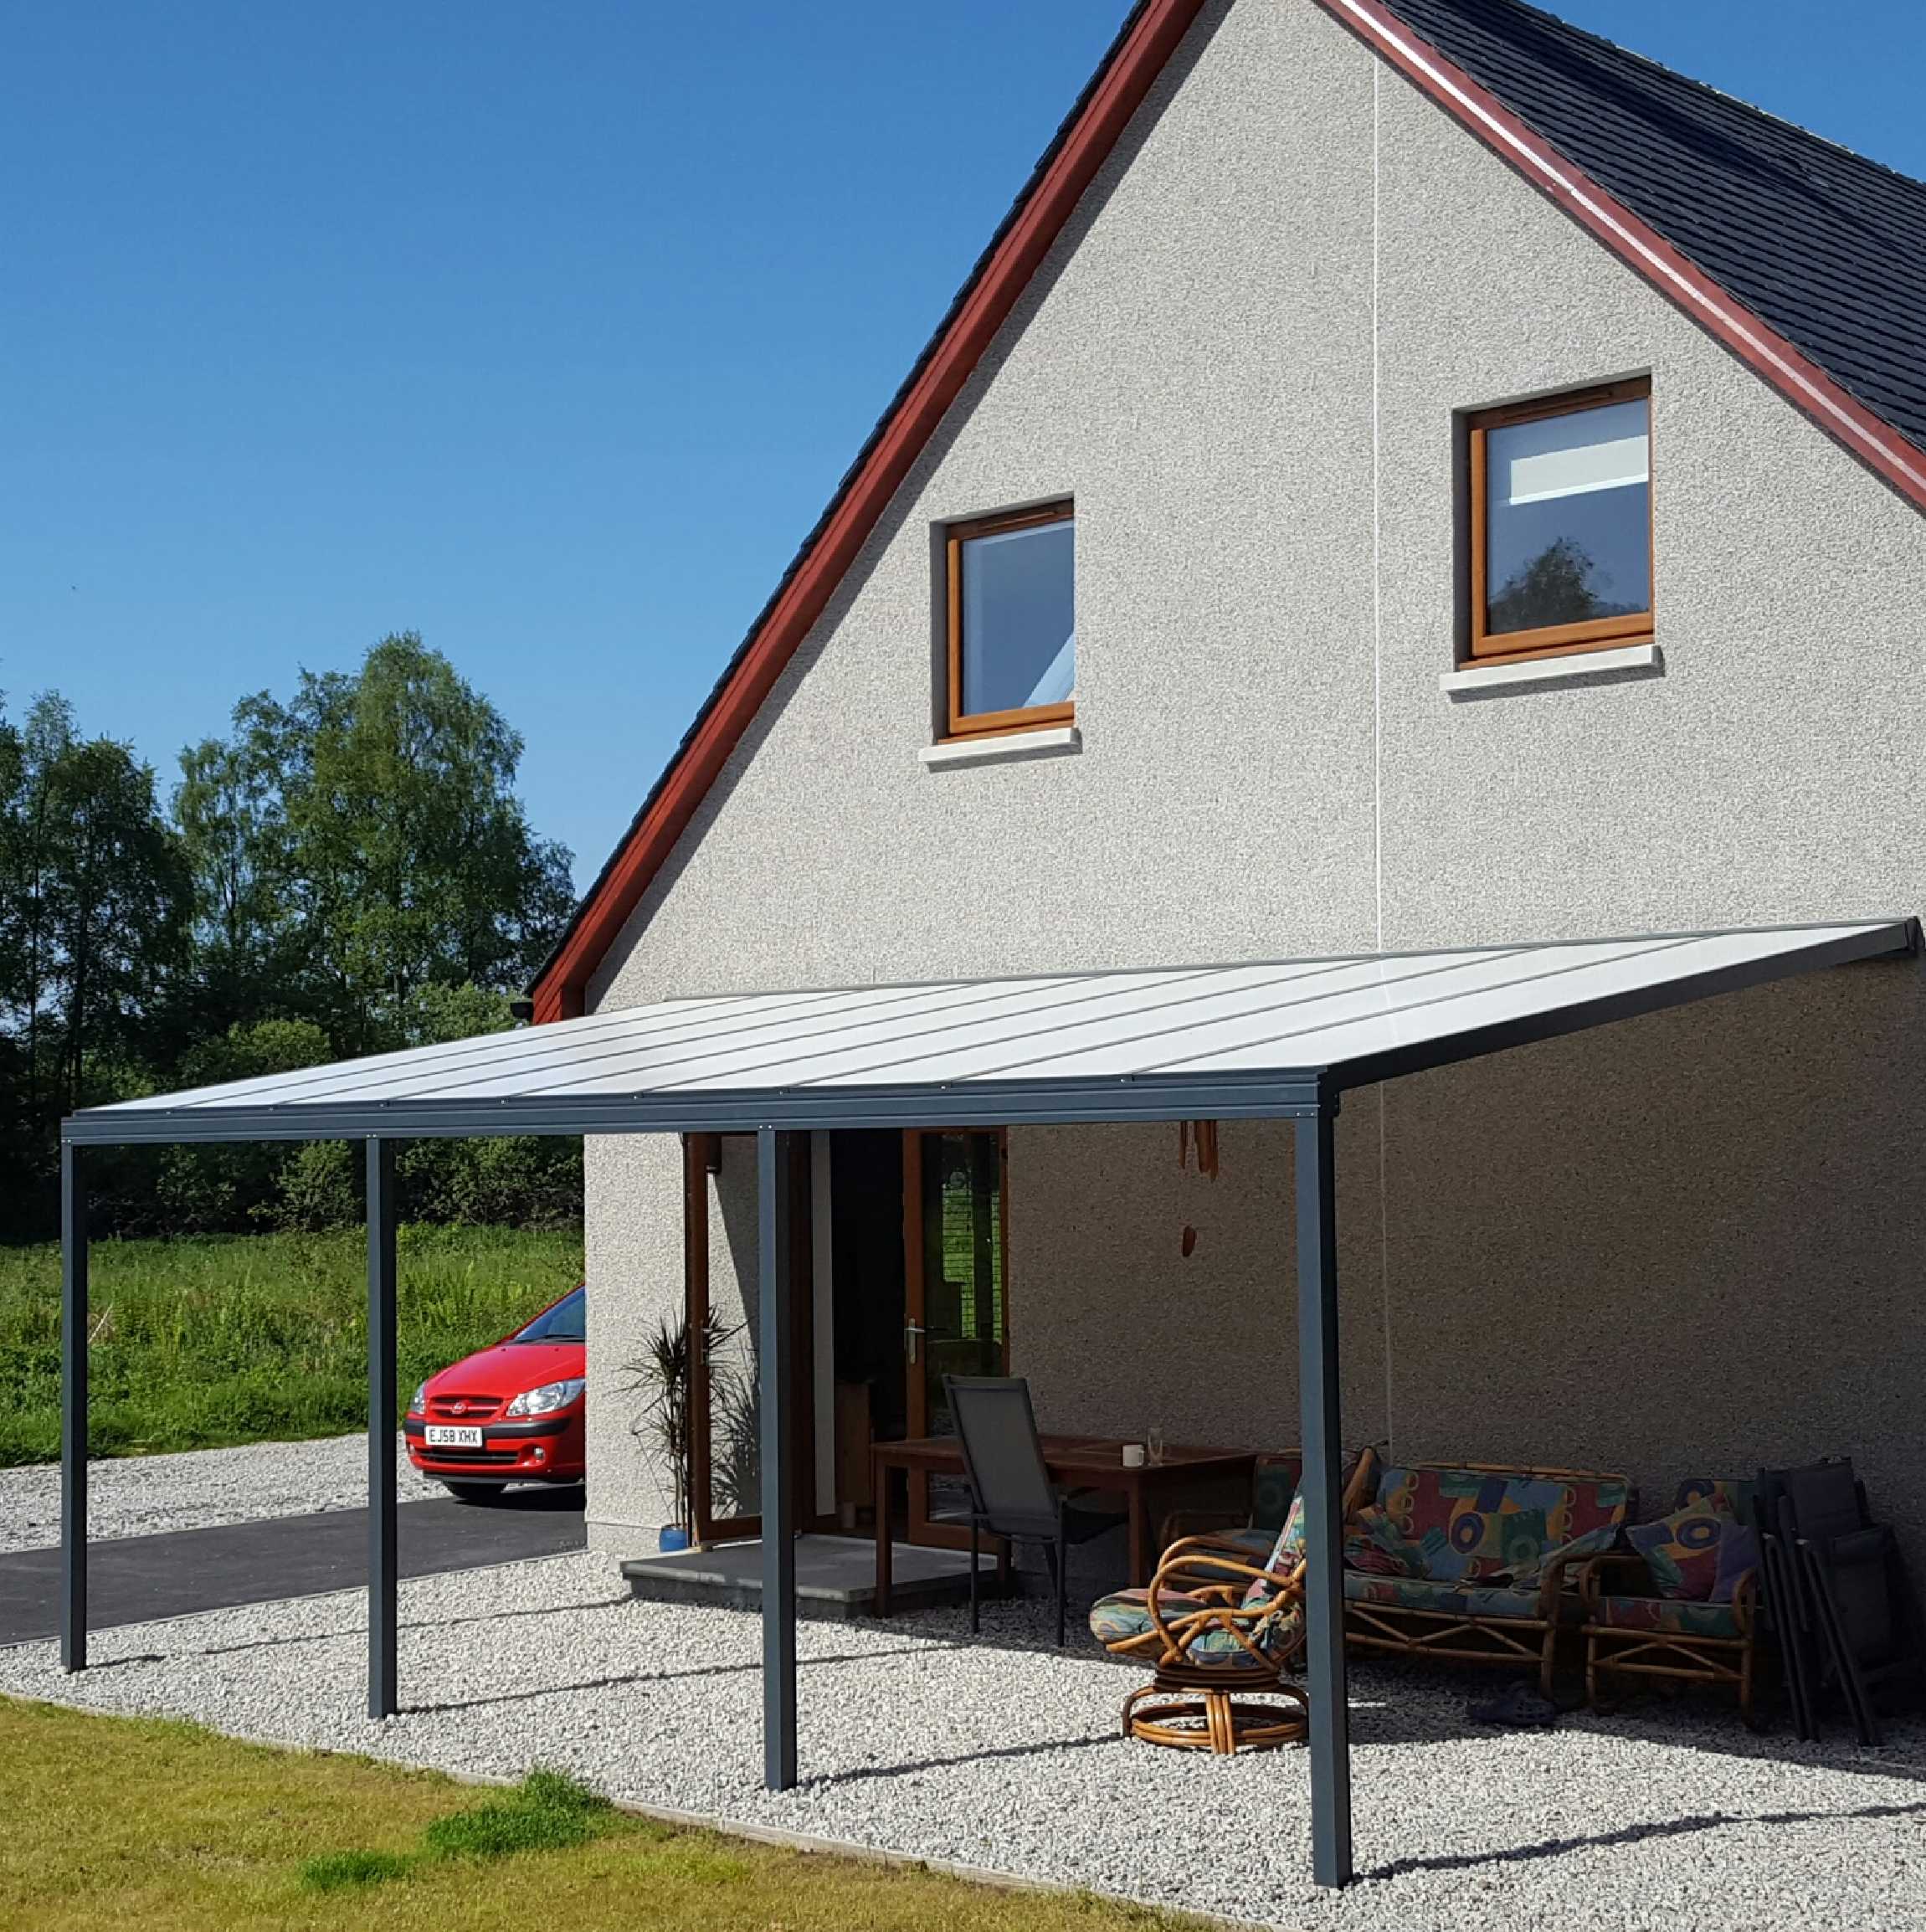 Great selection of SPECIAL OFFER Omega Smart Lean-To Canopy, Anthracite Grey, 16mm Polycarbonate Glazing - 2.5m (W) x 3.0m (P), (2) Supporting Posts